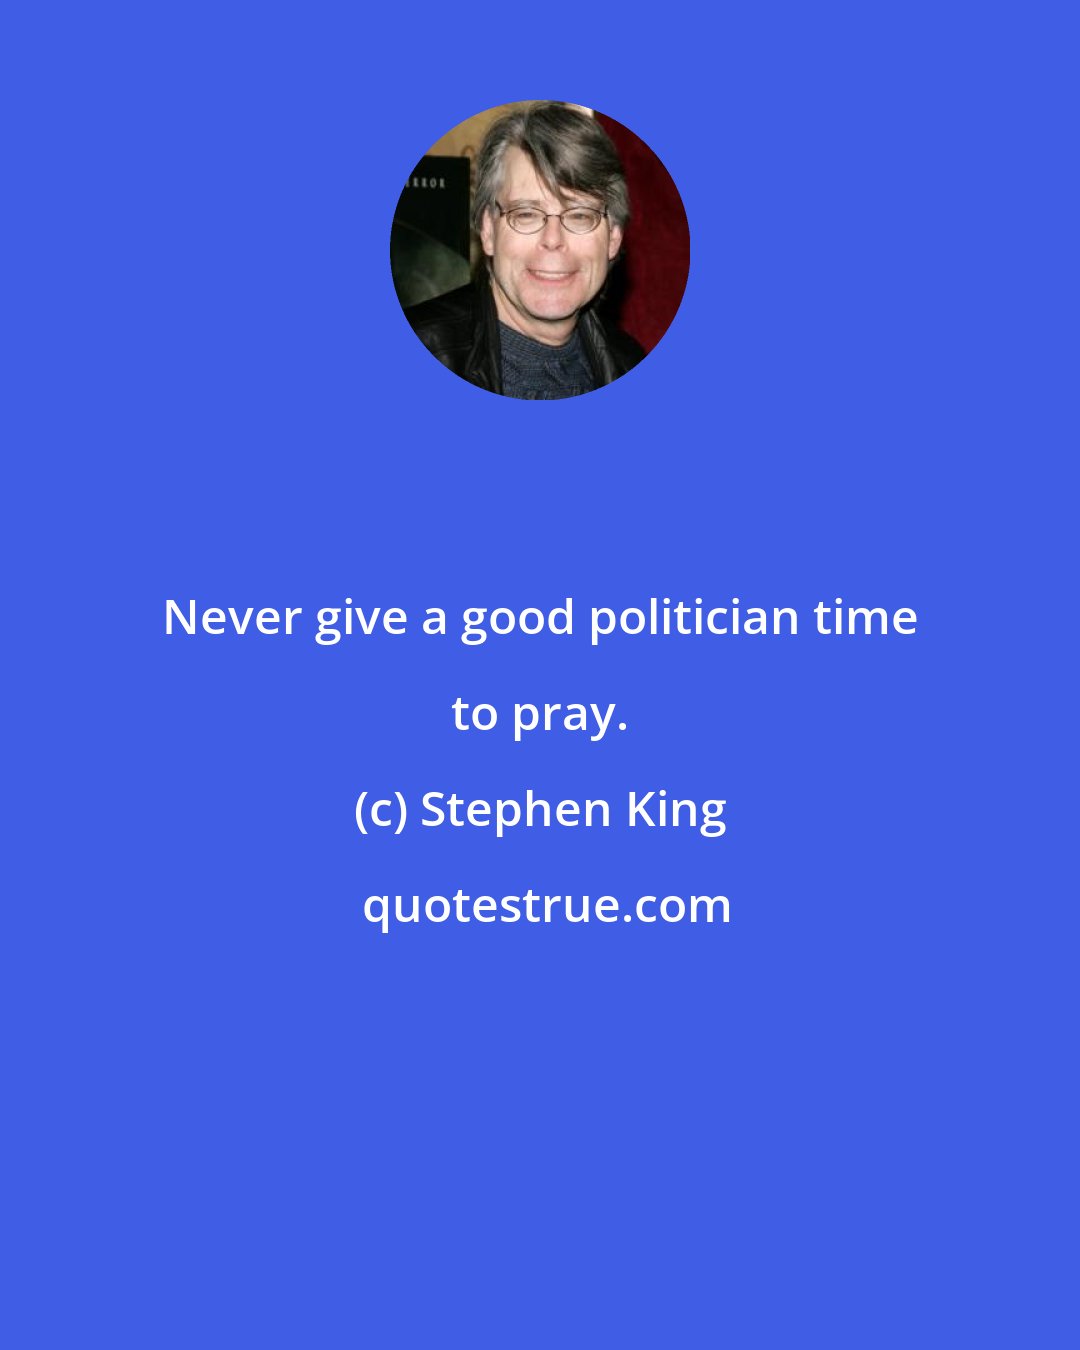 Stephen King: Never give a good politician time to pray.